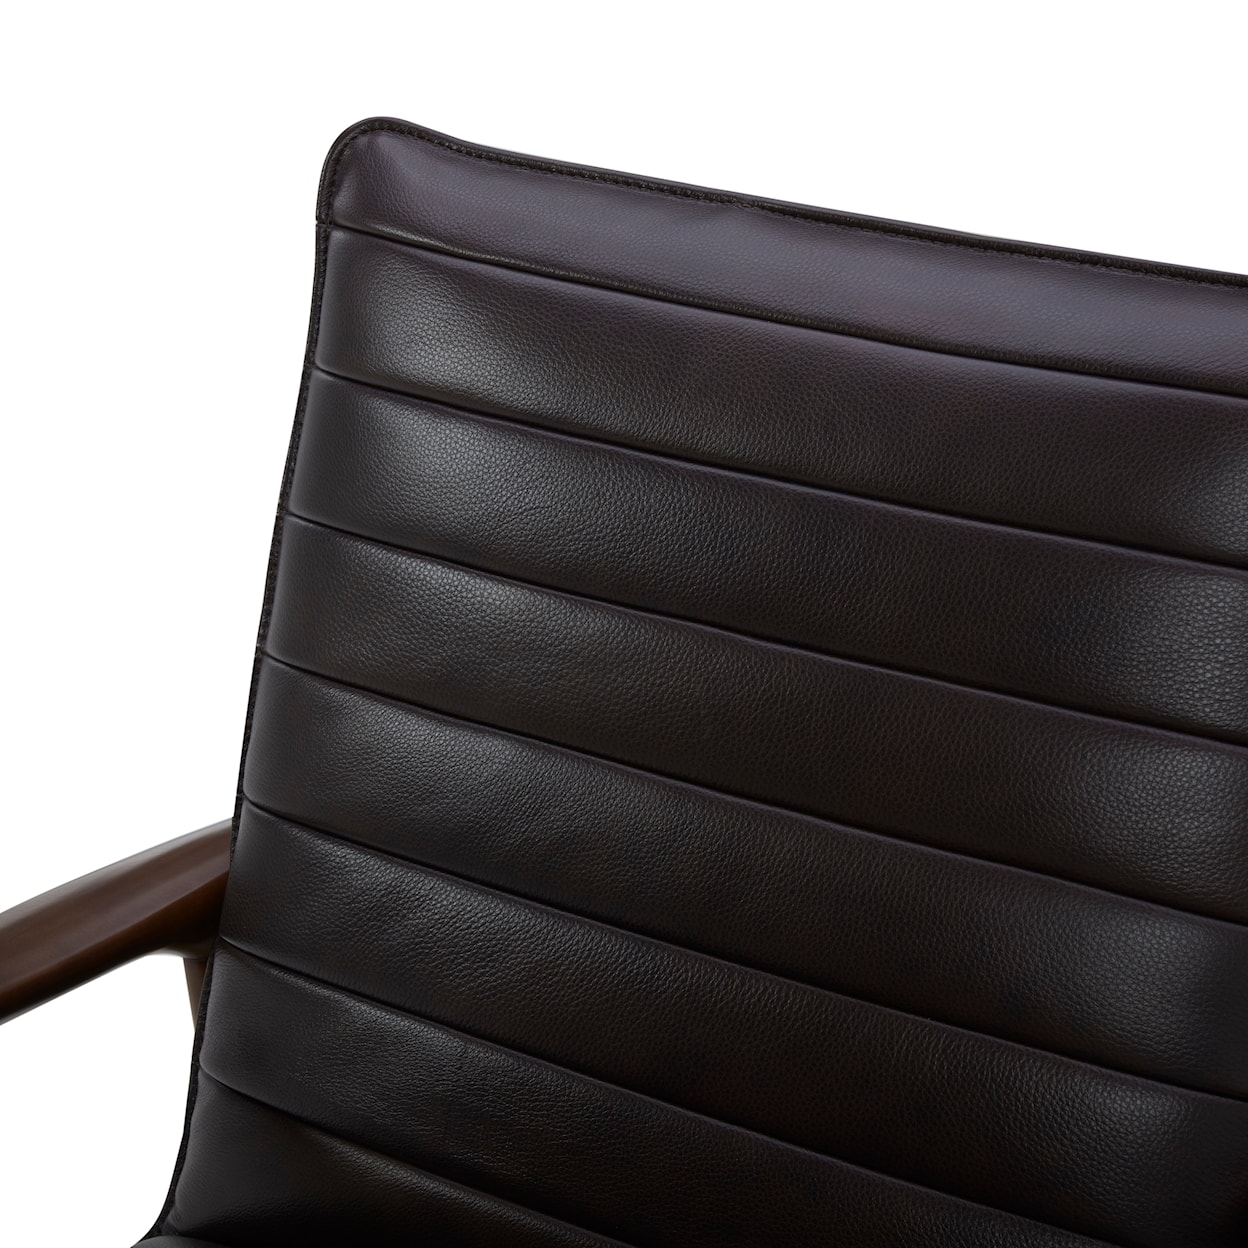 Warehouse M ETHAN Brown Accent Leather Chair